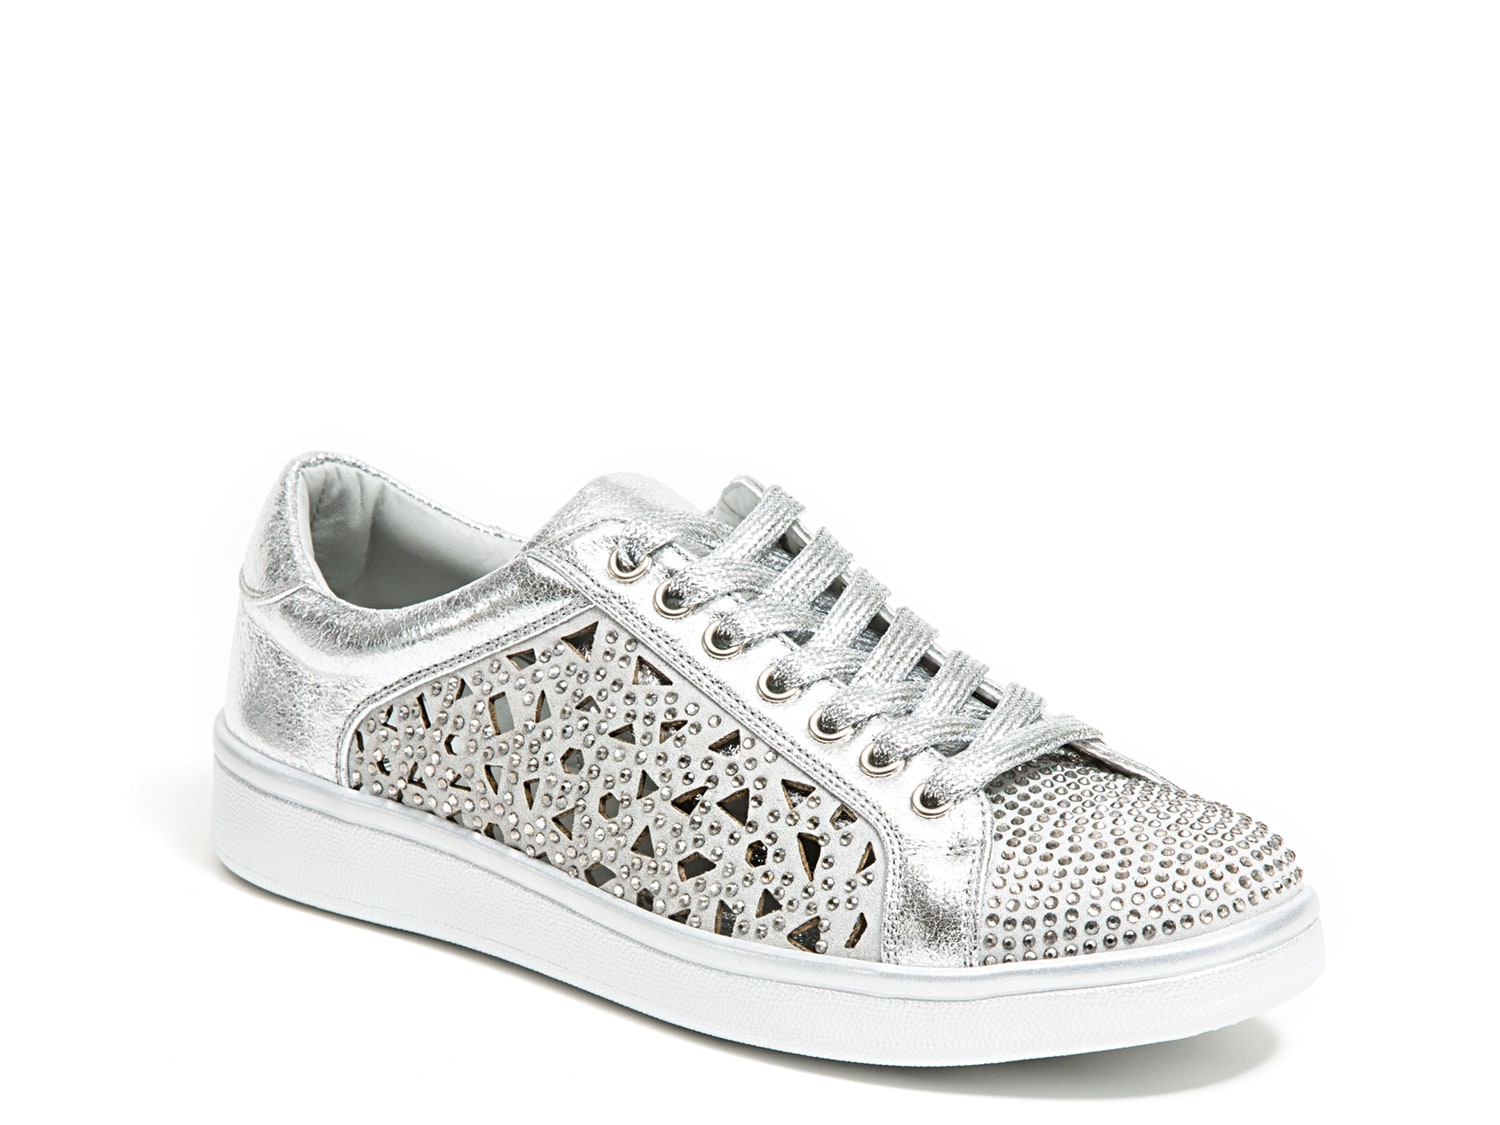 Lady Couture Paris Sneaker - Free Shipping | DSW